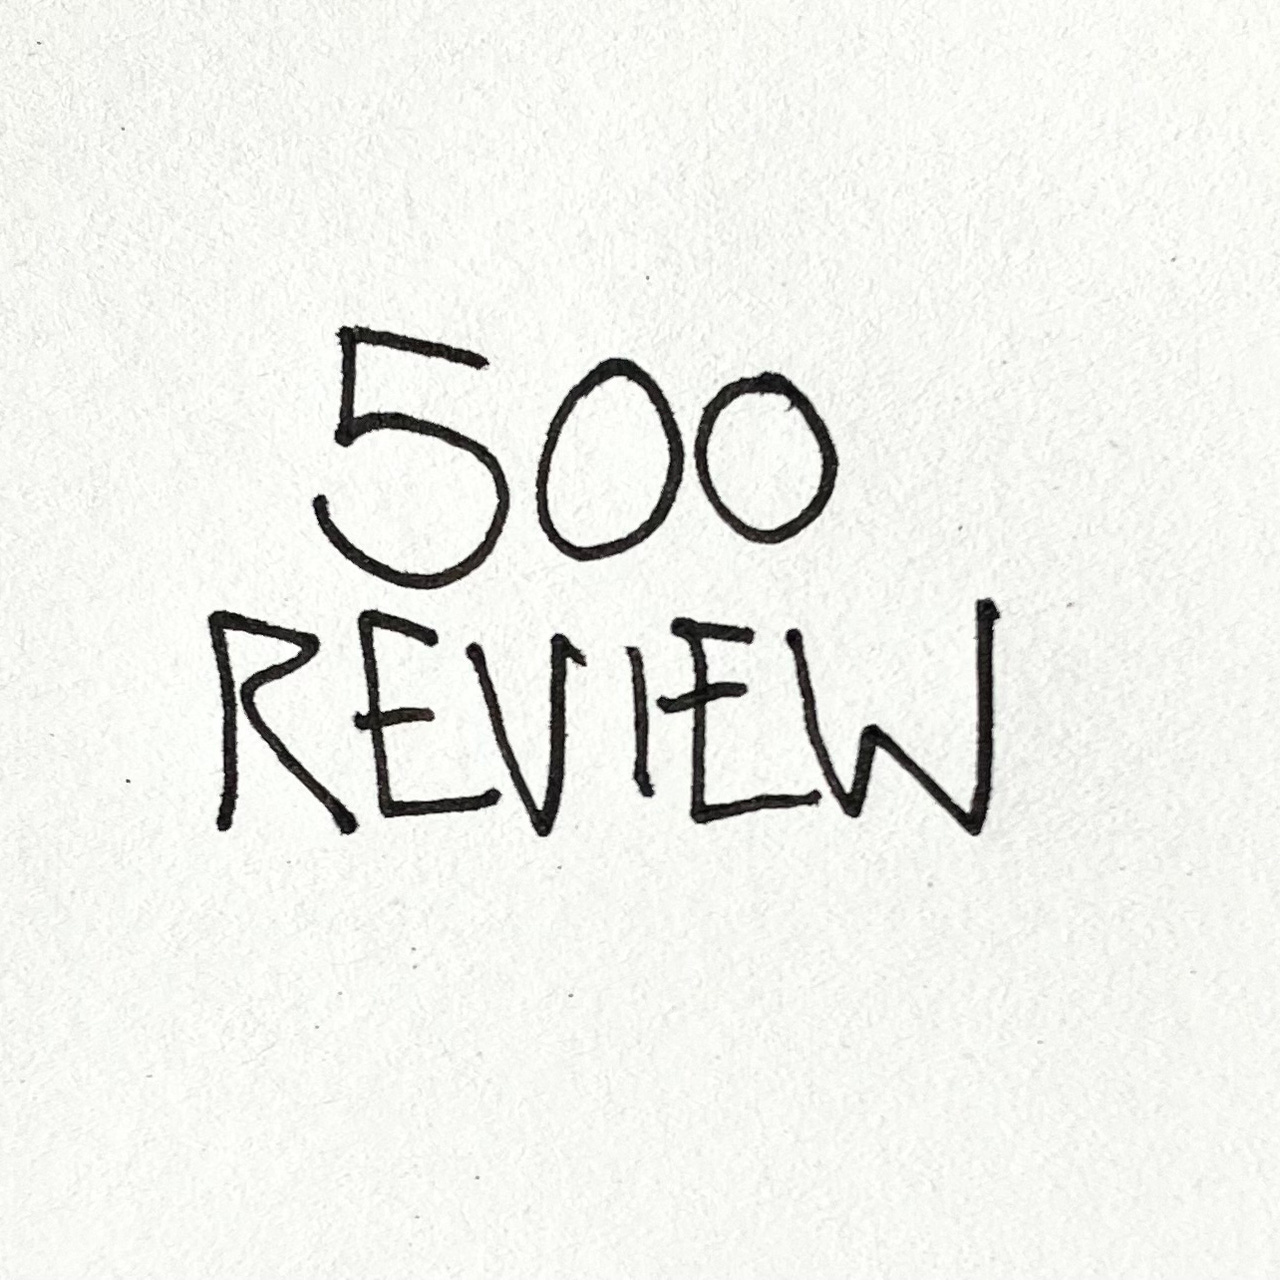 Artwork for 500 Review